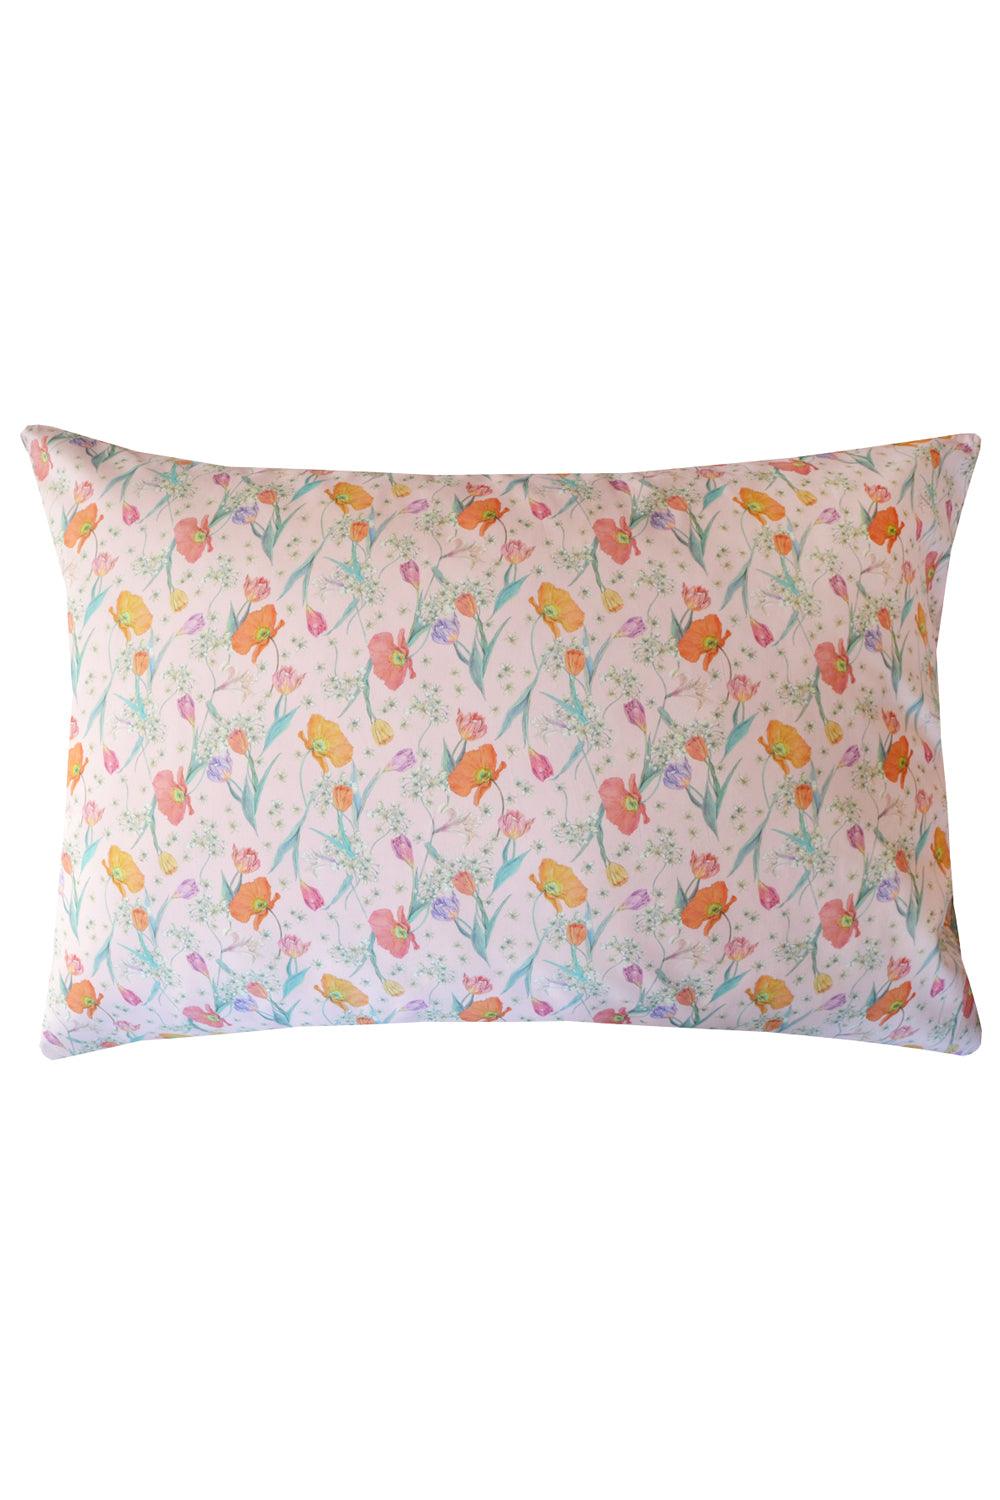 Pillowcase made with Liberty Fabric SPRING BLOOMS - Coco & Wolf